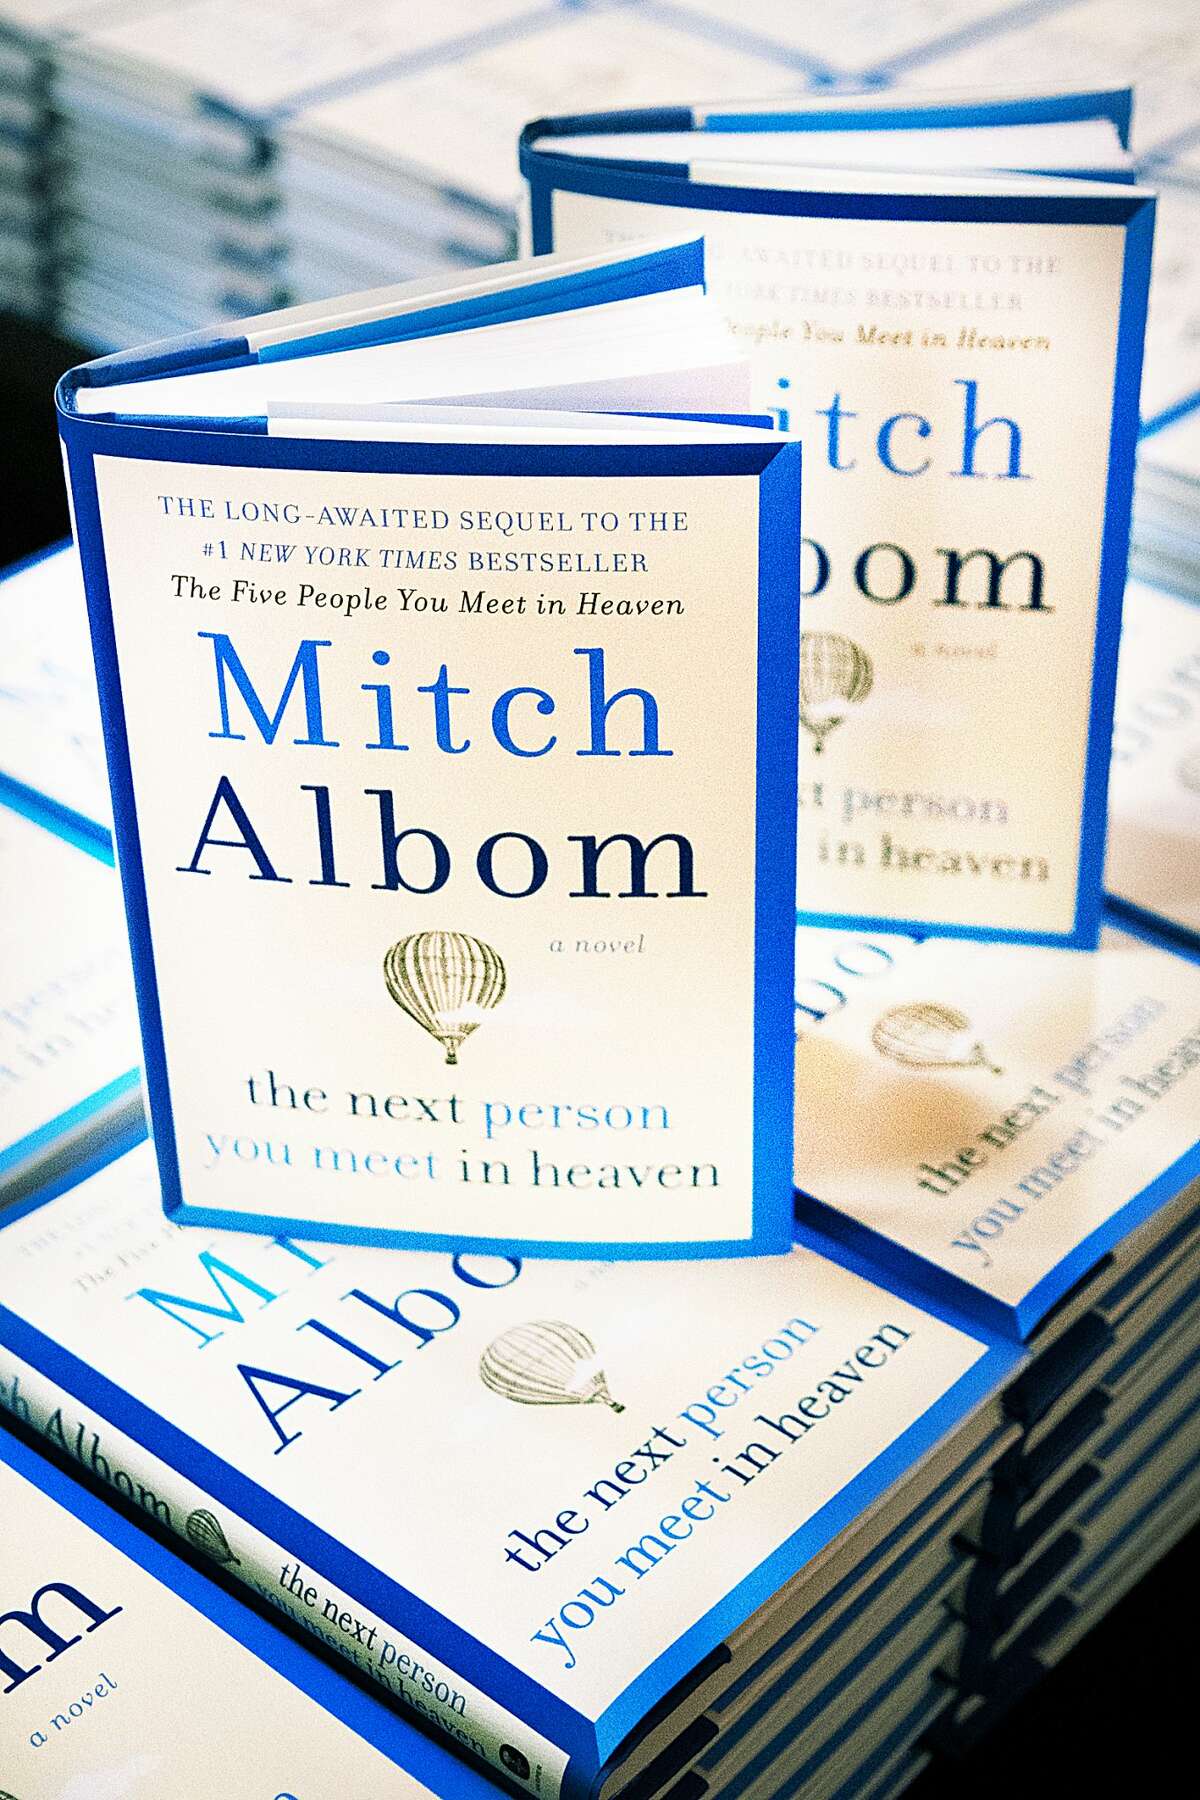 Mitch Albom talks about his latest book at MCFTA